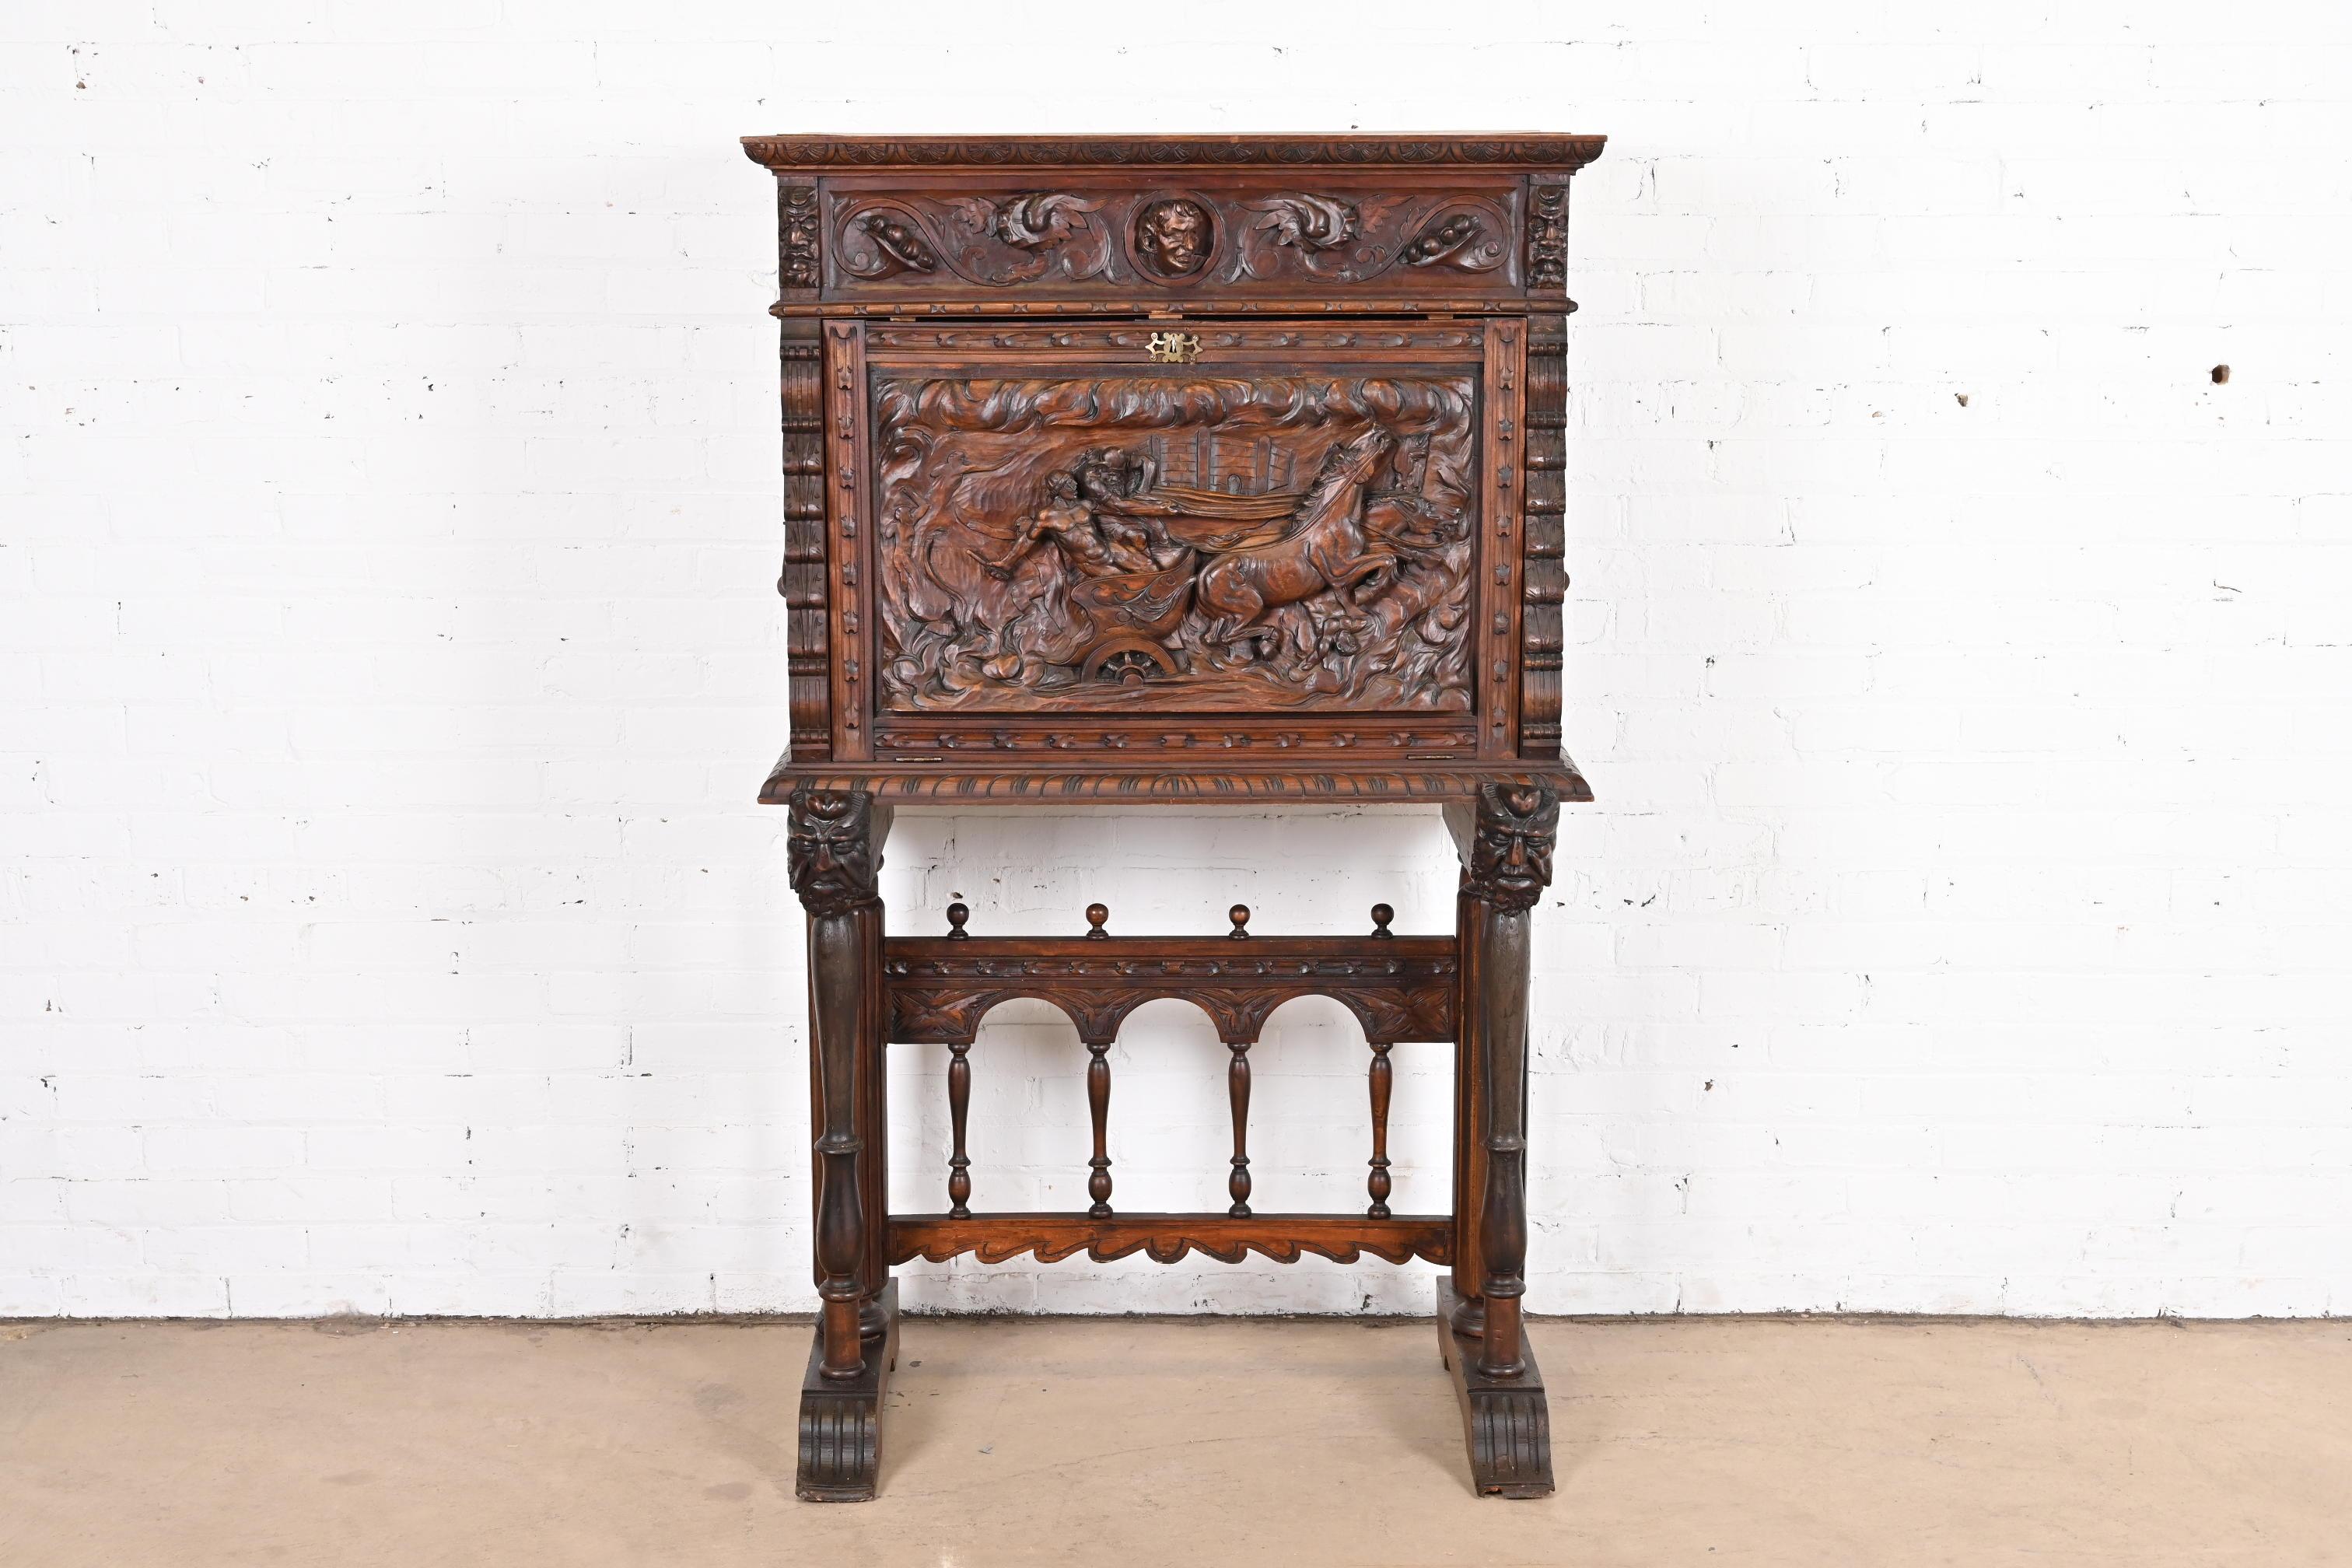 An outstanding antique Spanish Baroque Renaissance drop front desk or bar cabinet on stand

Spain, Late 19th century

Ornate carved walnut, with carved faces and horse and chariot with riders, and original iron hardware.

Measures: 37.25